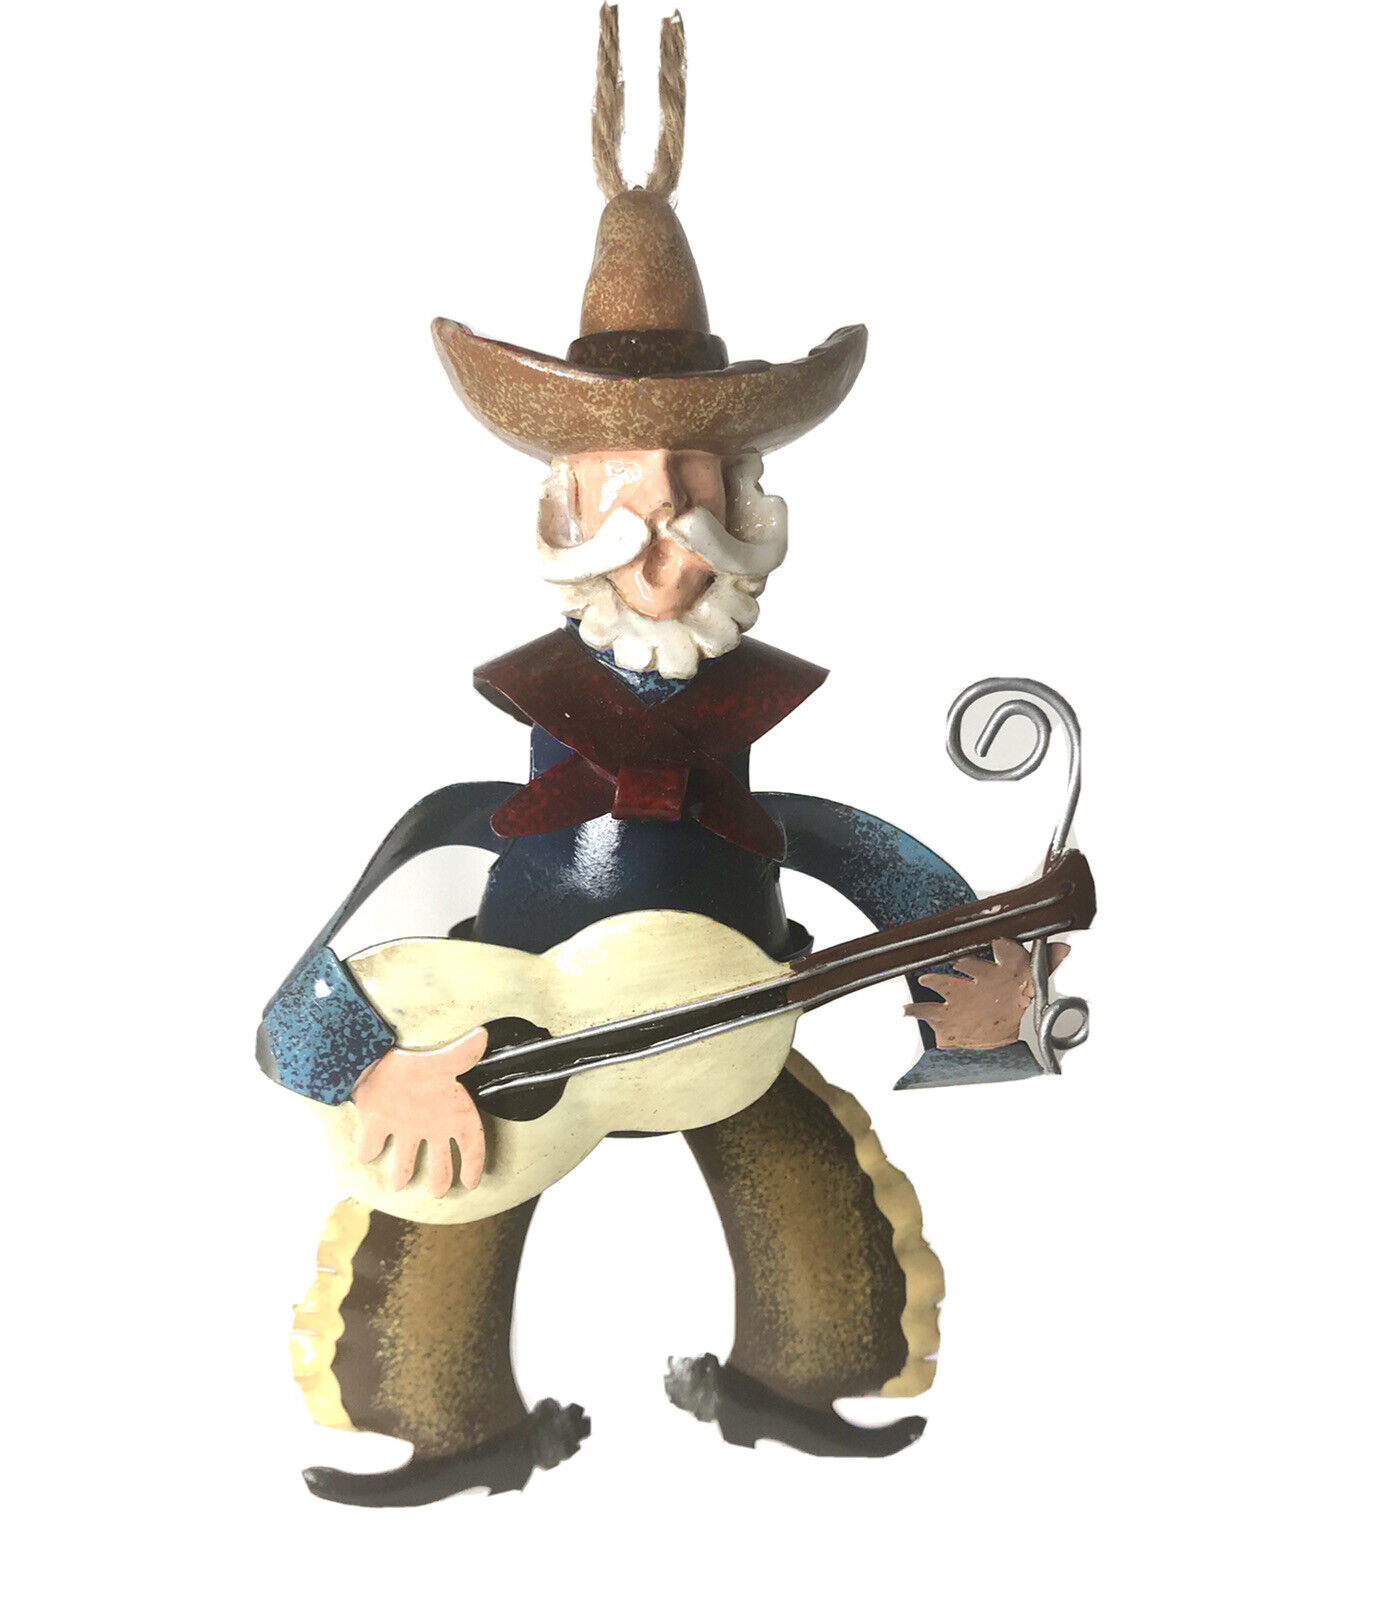 Rustic Tin Metal Singing Cowboy Playing Guitar Marionette Christmas Ornament 